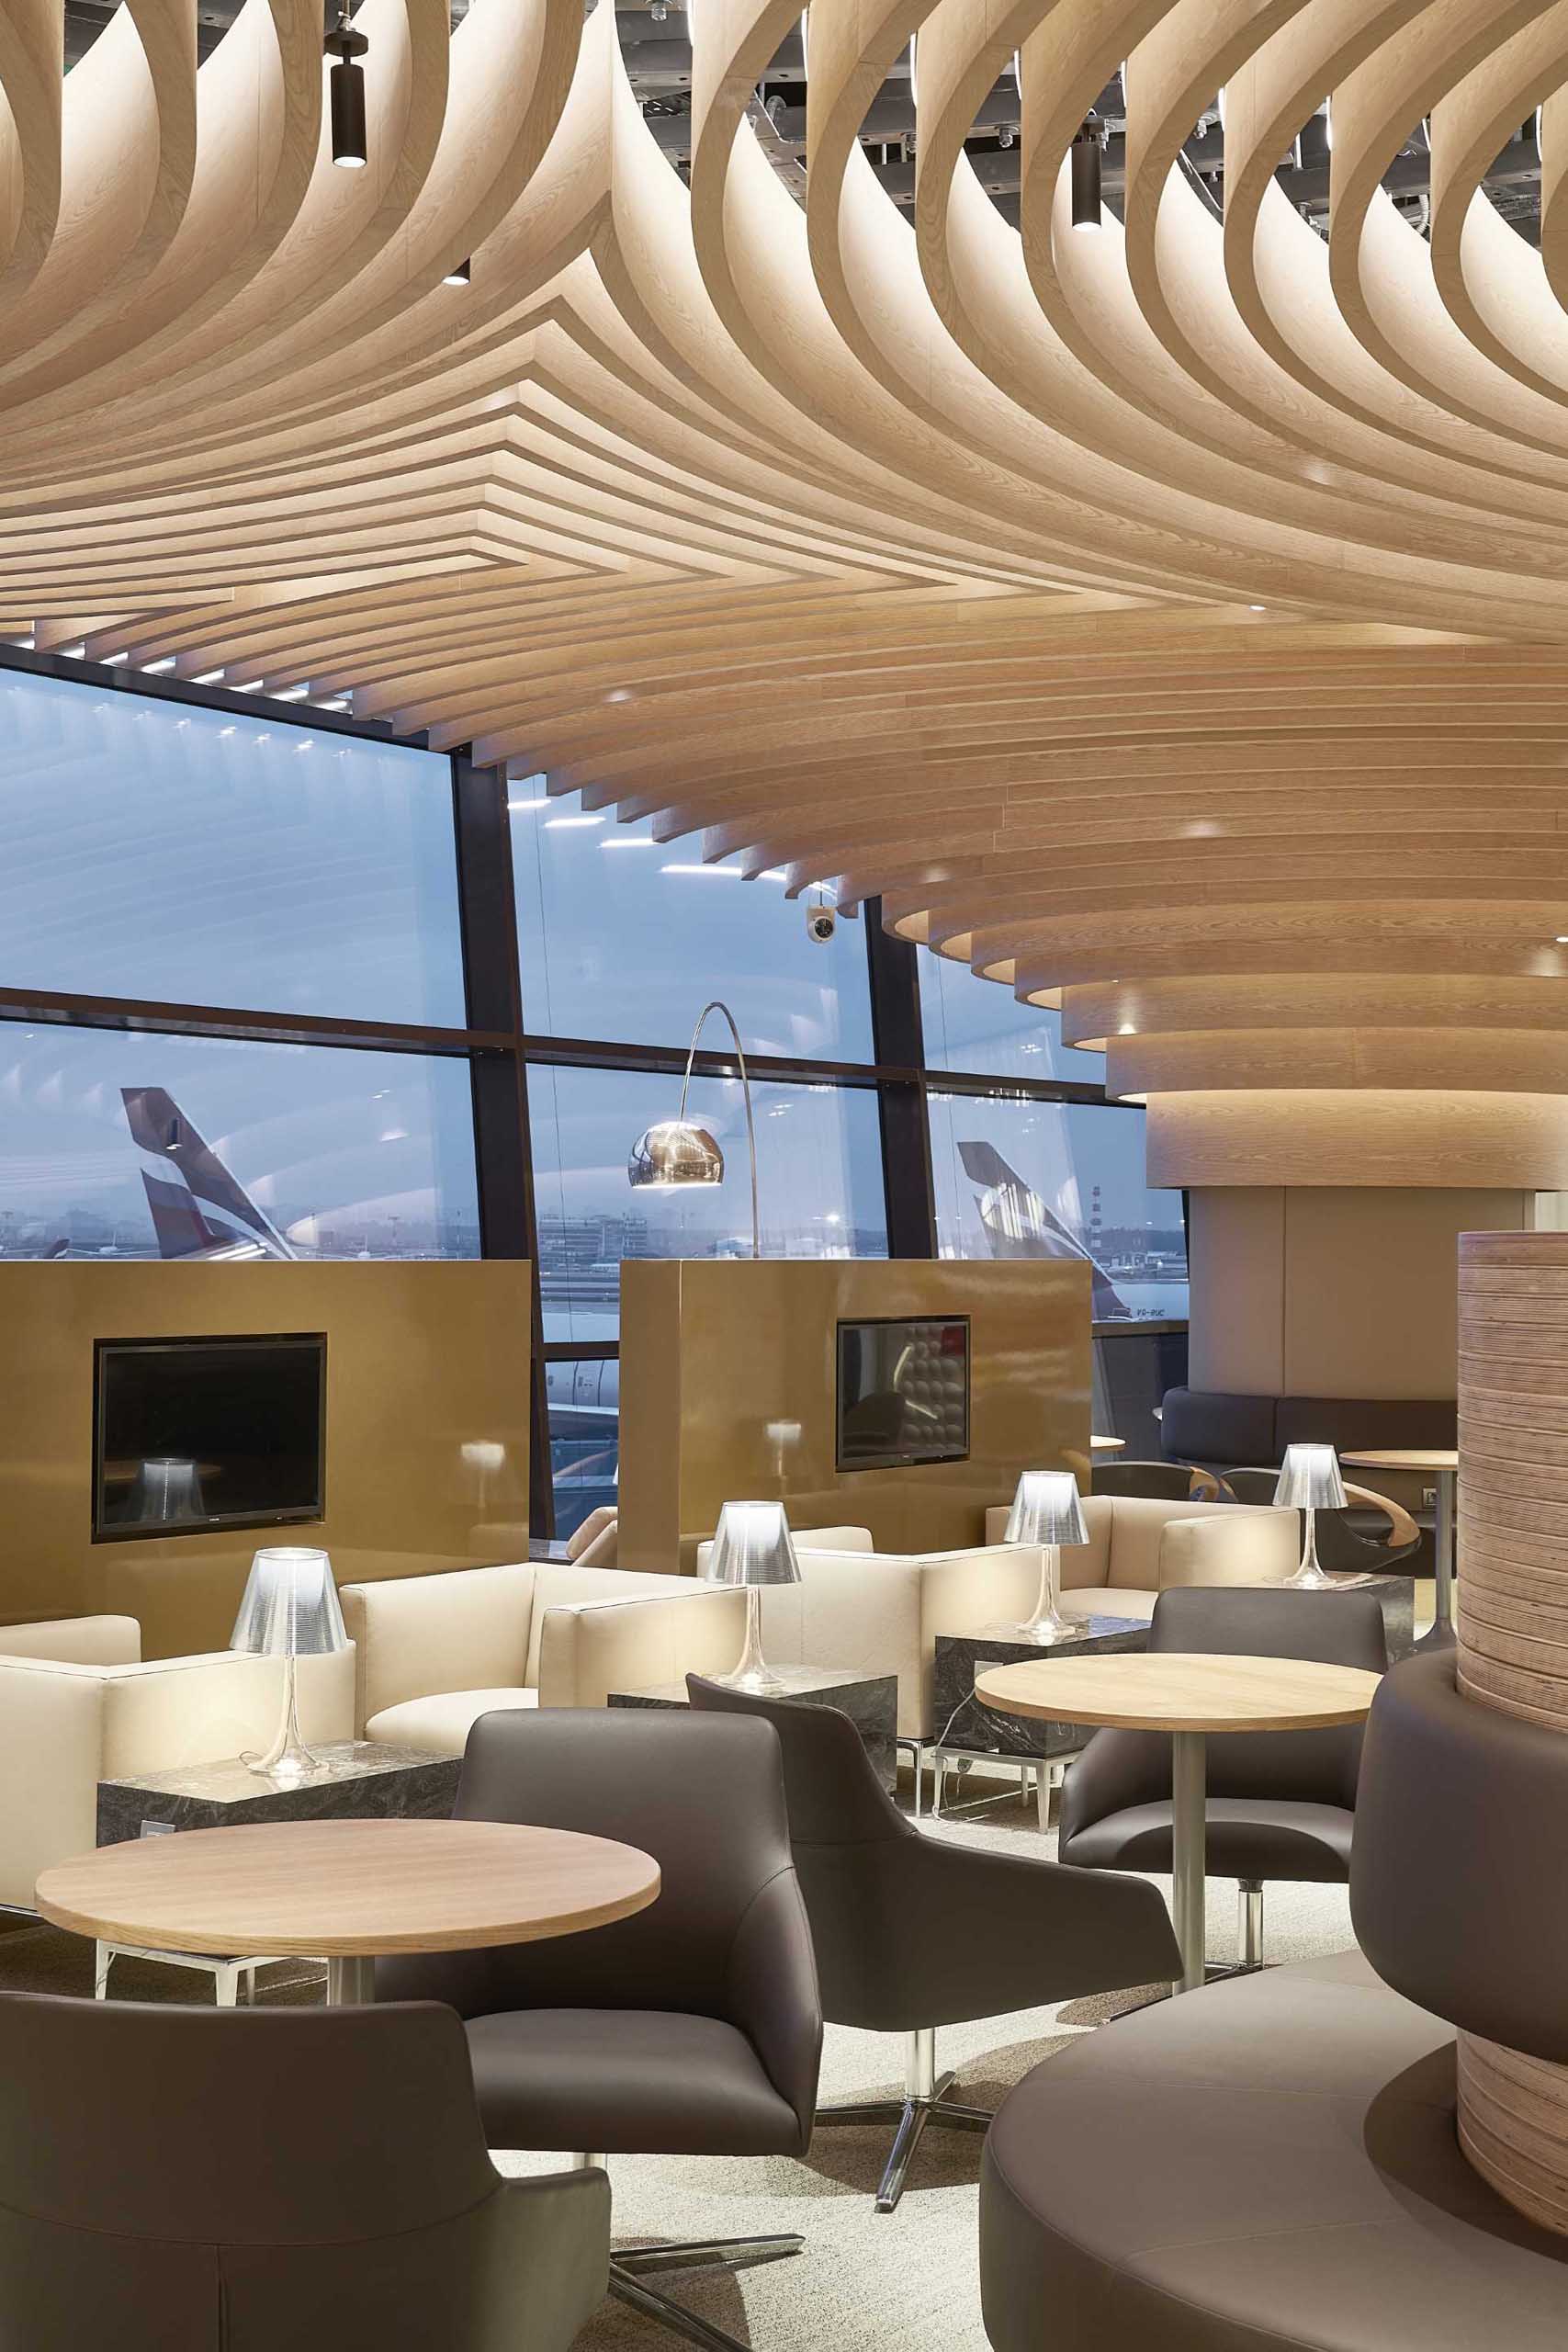 A modern airport lounge with circular wood ceiling patterns.